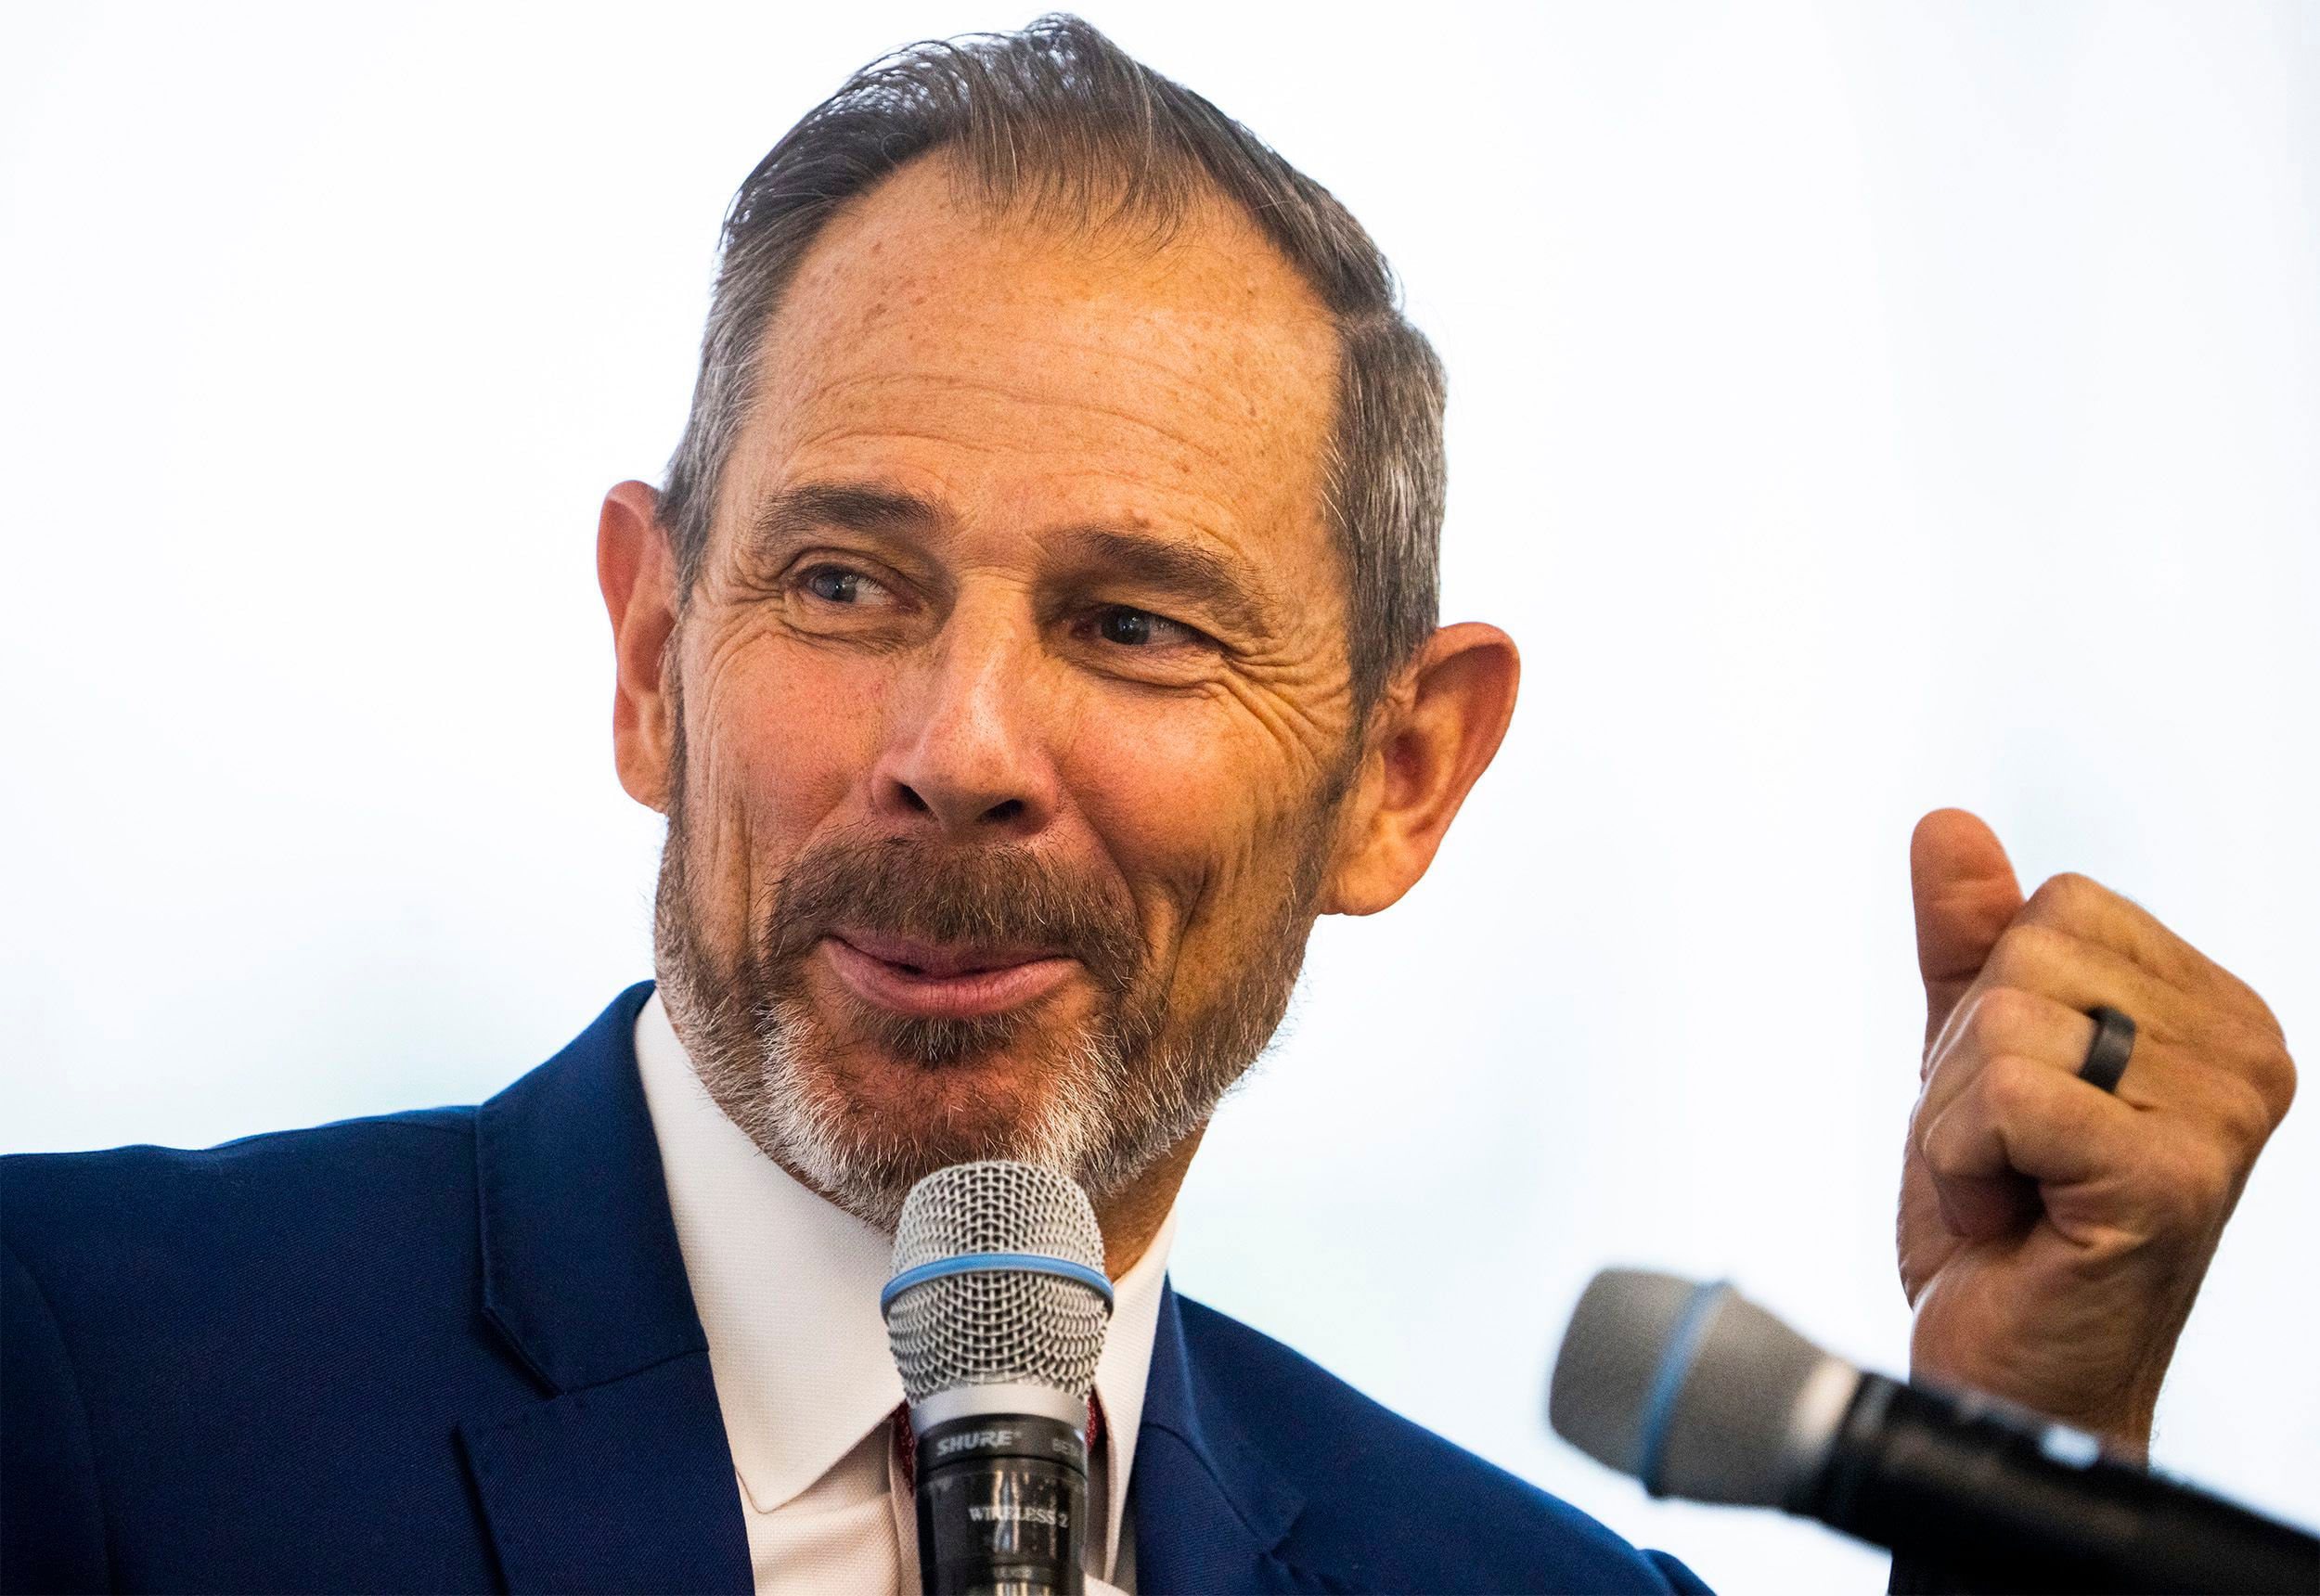 New poll shows Rep. John Curtis with a big lead over rivals in Utah’s